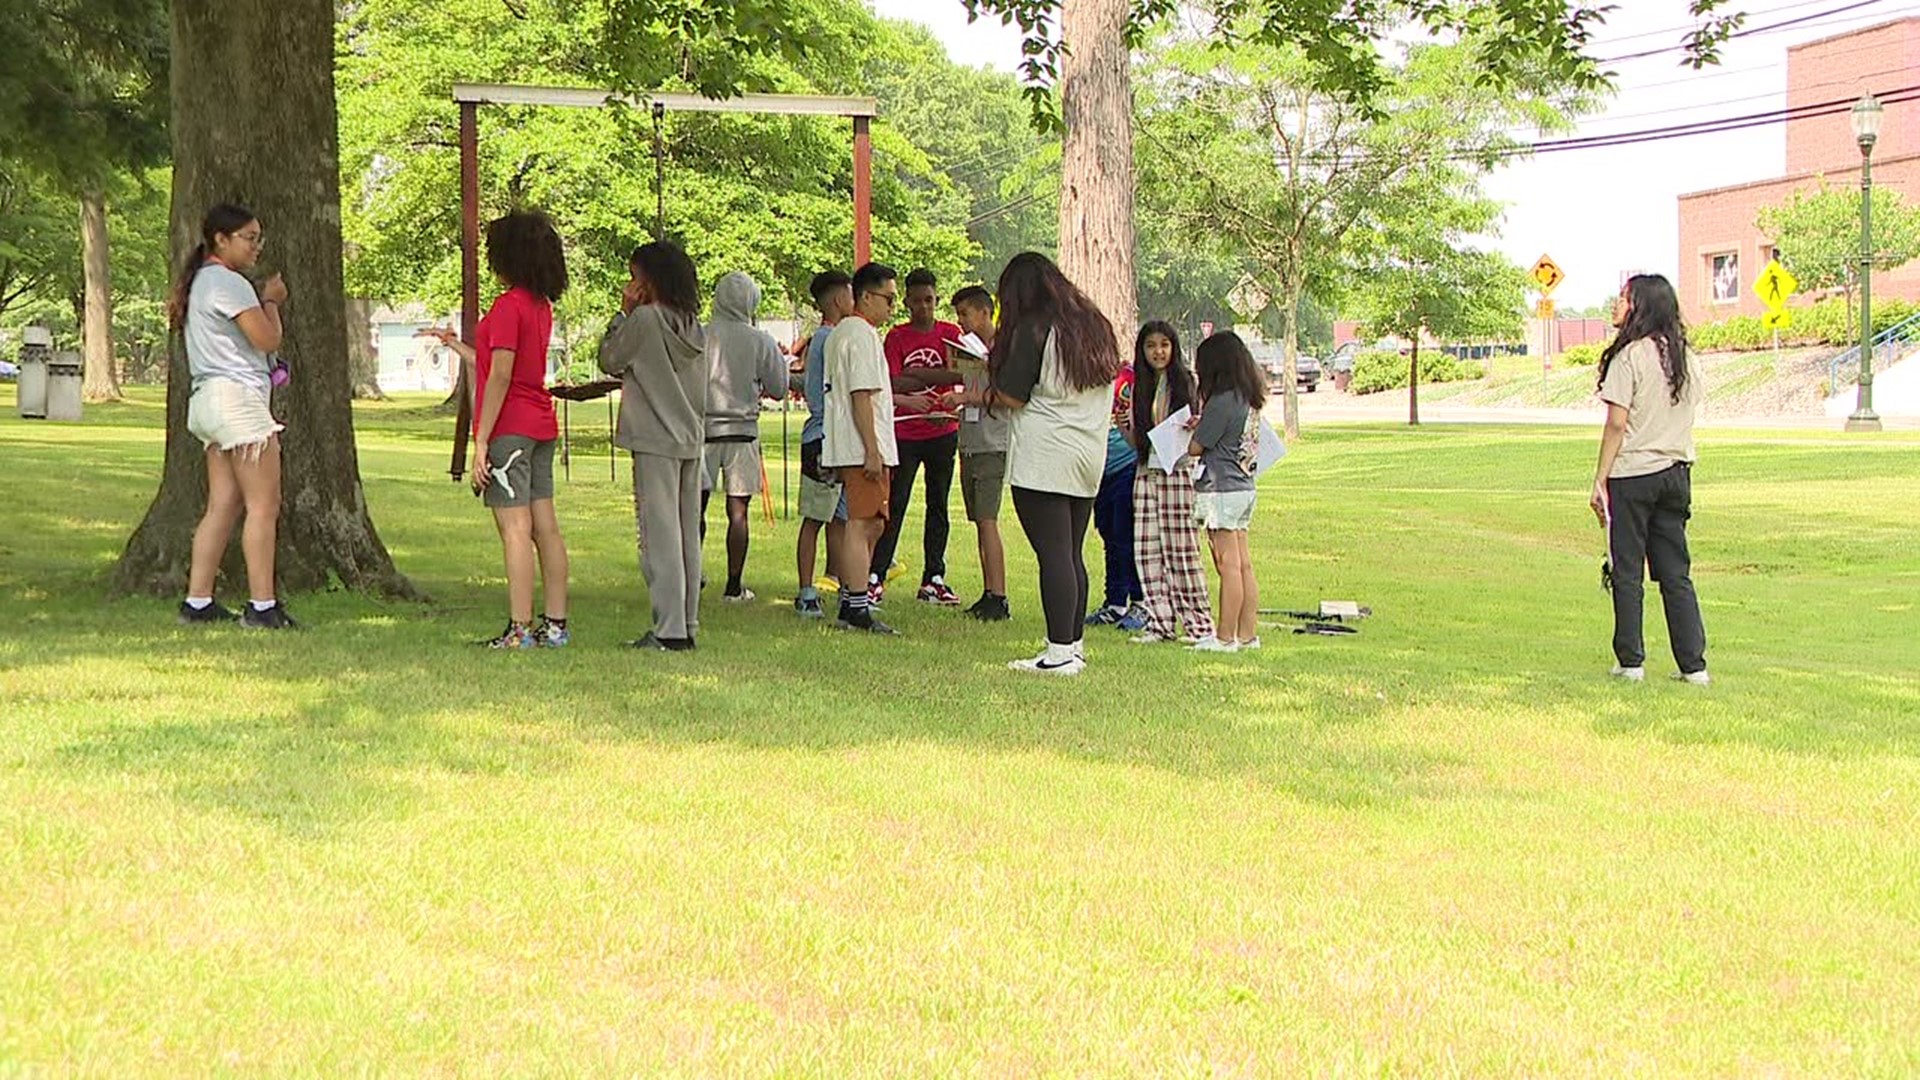 Newswatch 16's Courtney Harrison spoke with some of those campers, figuring out their American dream.